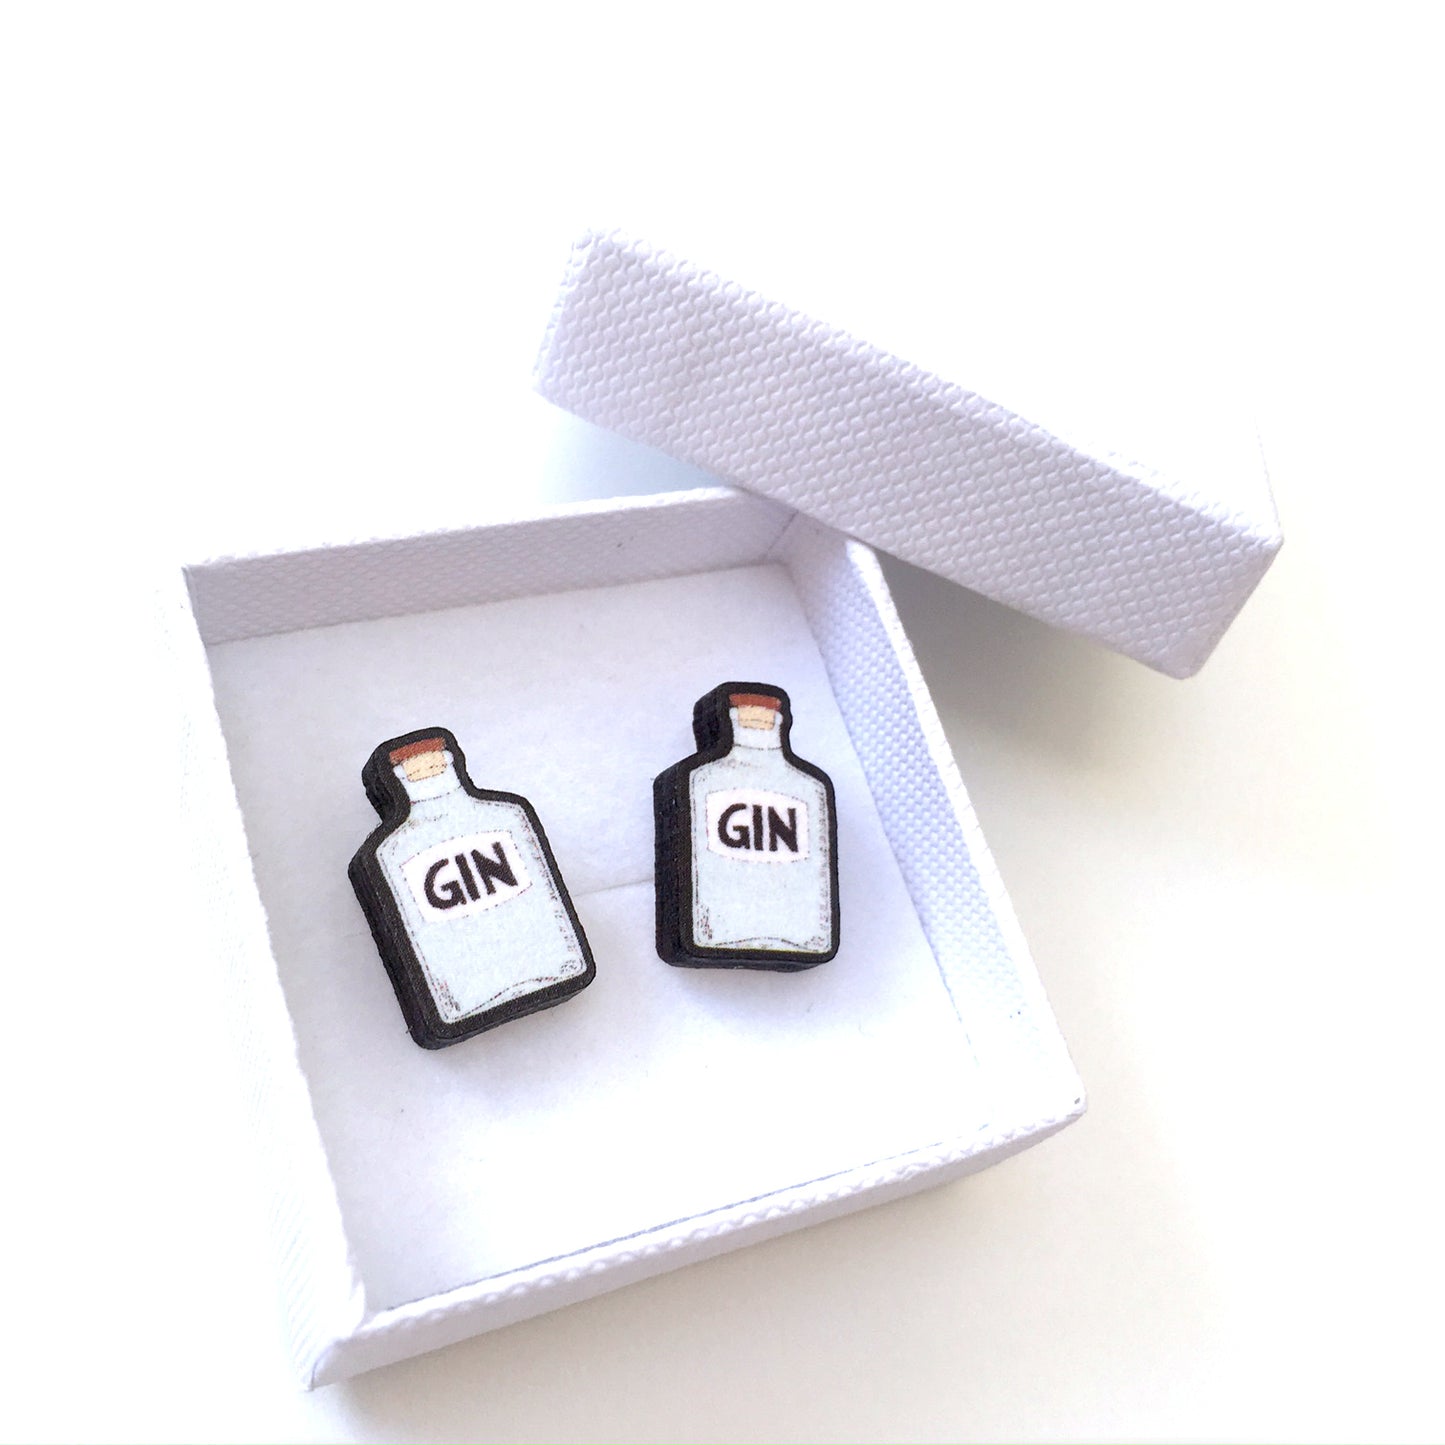 Gin bottle stud earrings - Quirky gift for her